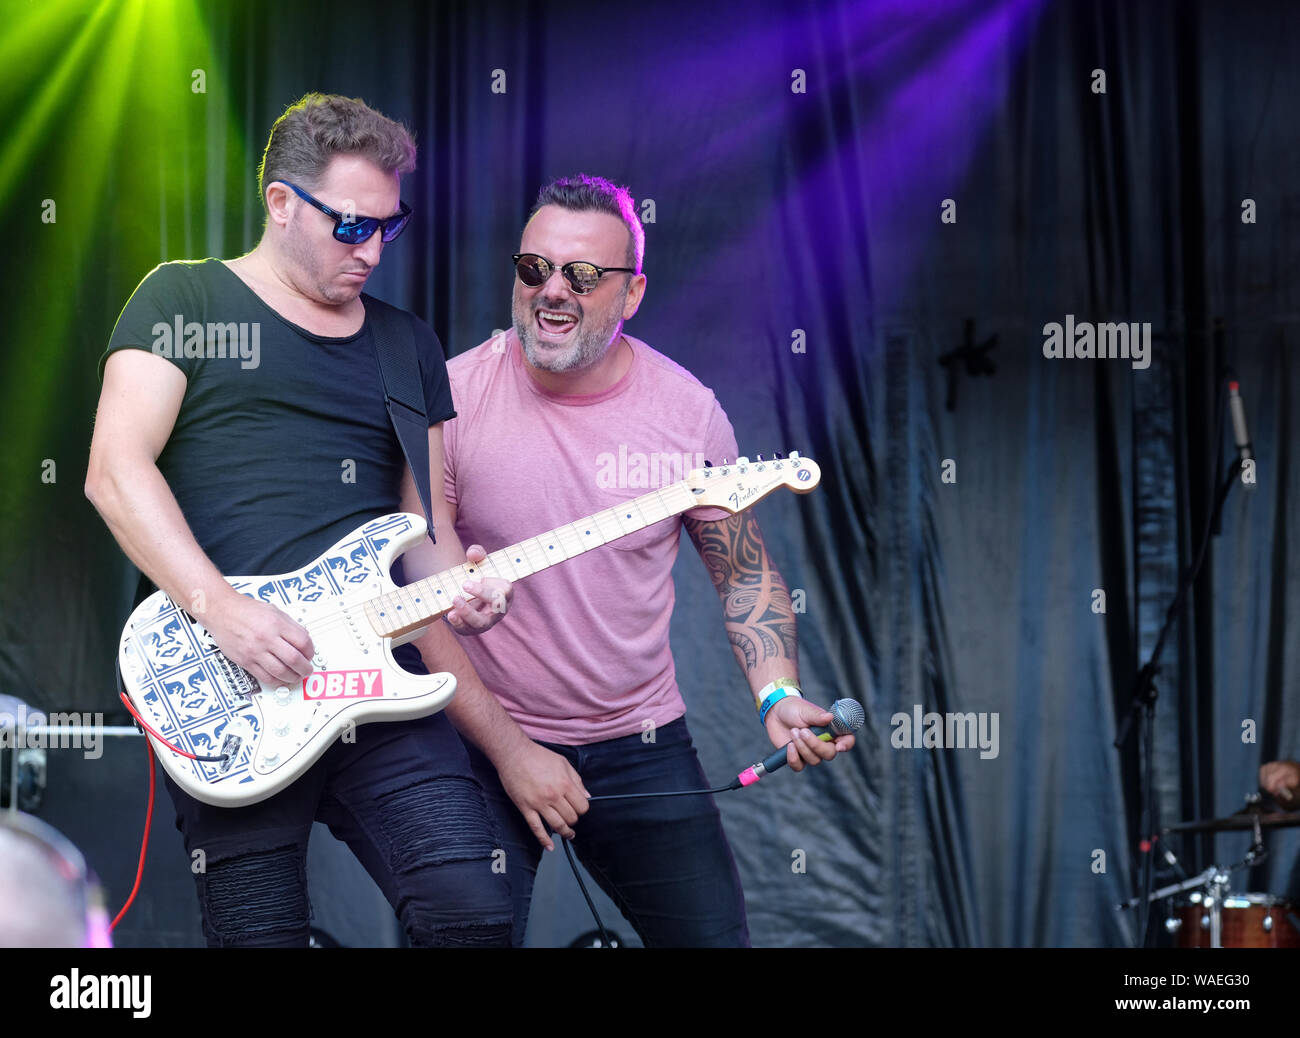 Stu Whitwell and Nolan Frendo of Jetstream performing at Weyfest music festival, Tilford, Surrey, UK. August 18, 2019 Stock Photo